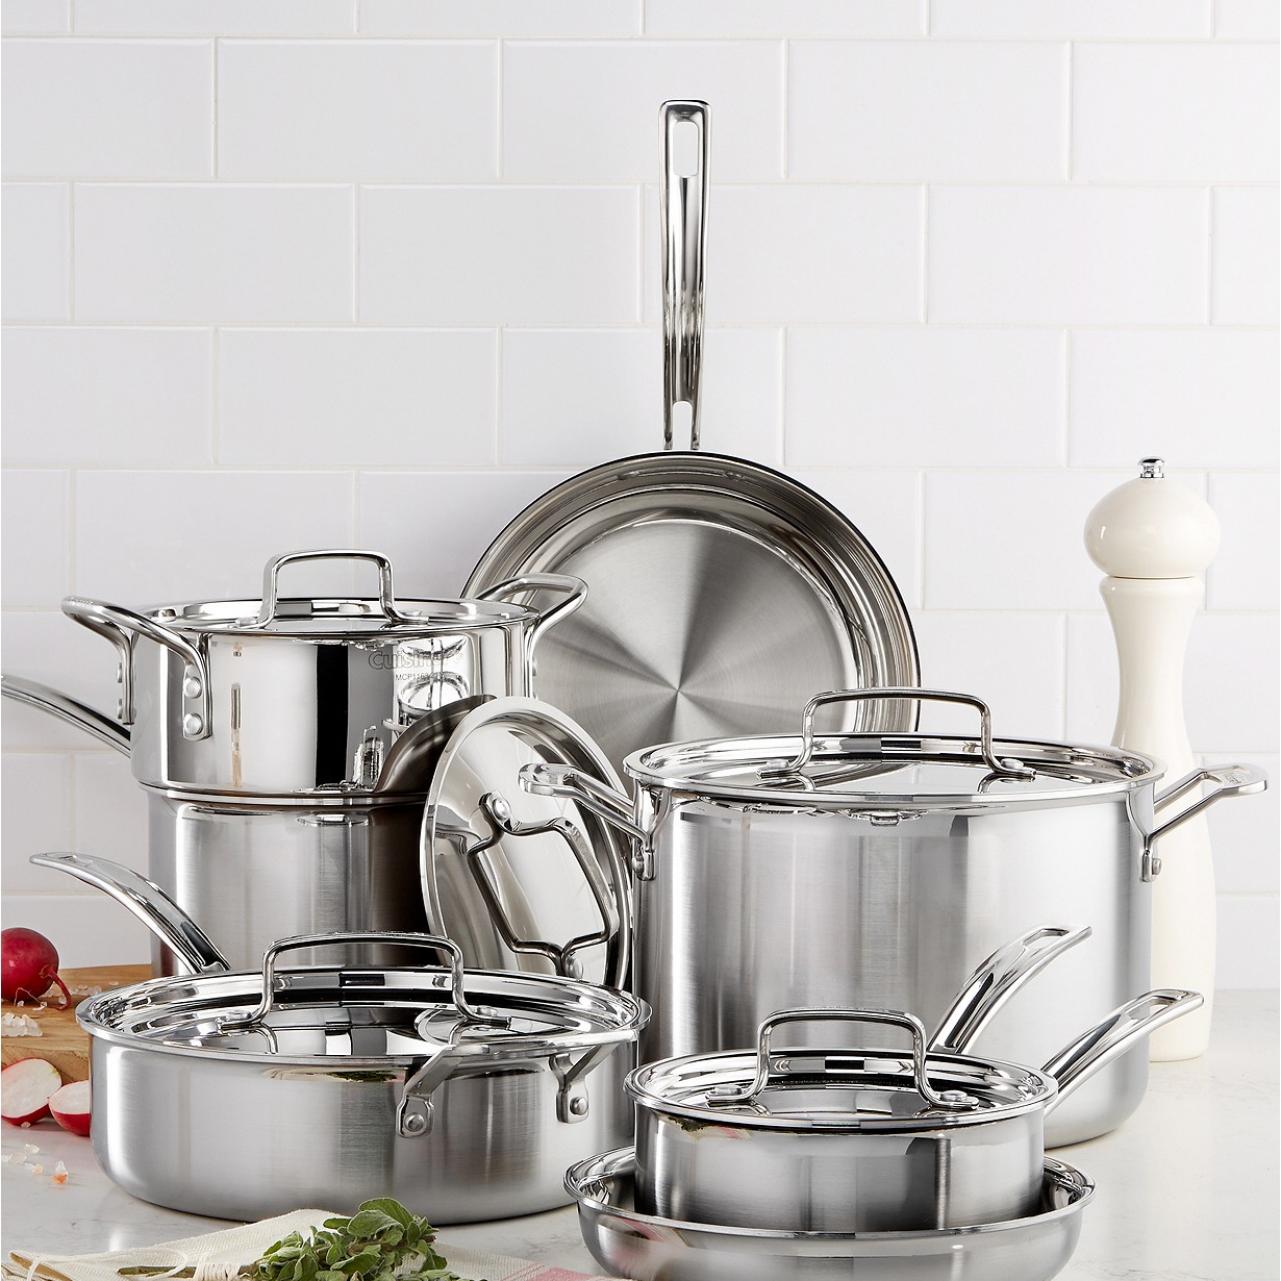 https://food.fnr.sndimg.com/content/dam/images/food/products/2019/6/27/rx_multiclad-pro-tri-ply-stainless-steel-12-piece-cookware-set.jpeg.rend.hgtvcom.1280.1280.suffix/1561643680061.jpeg